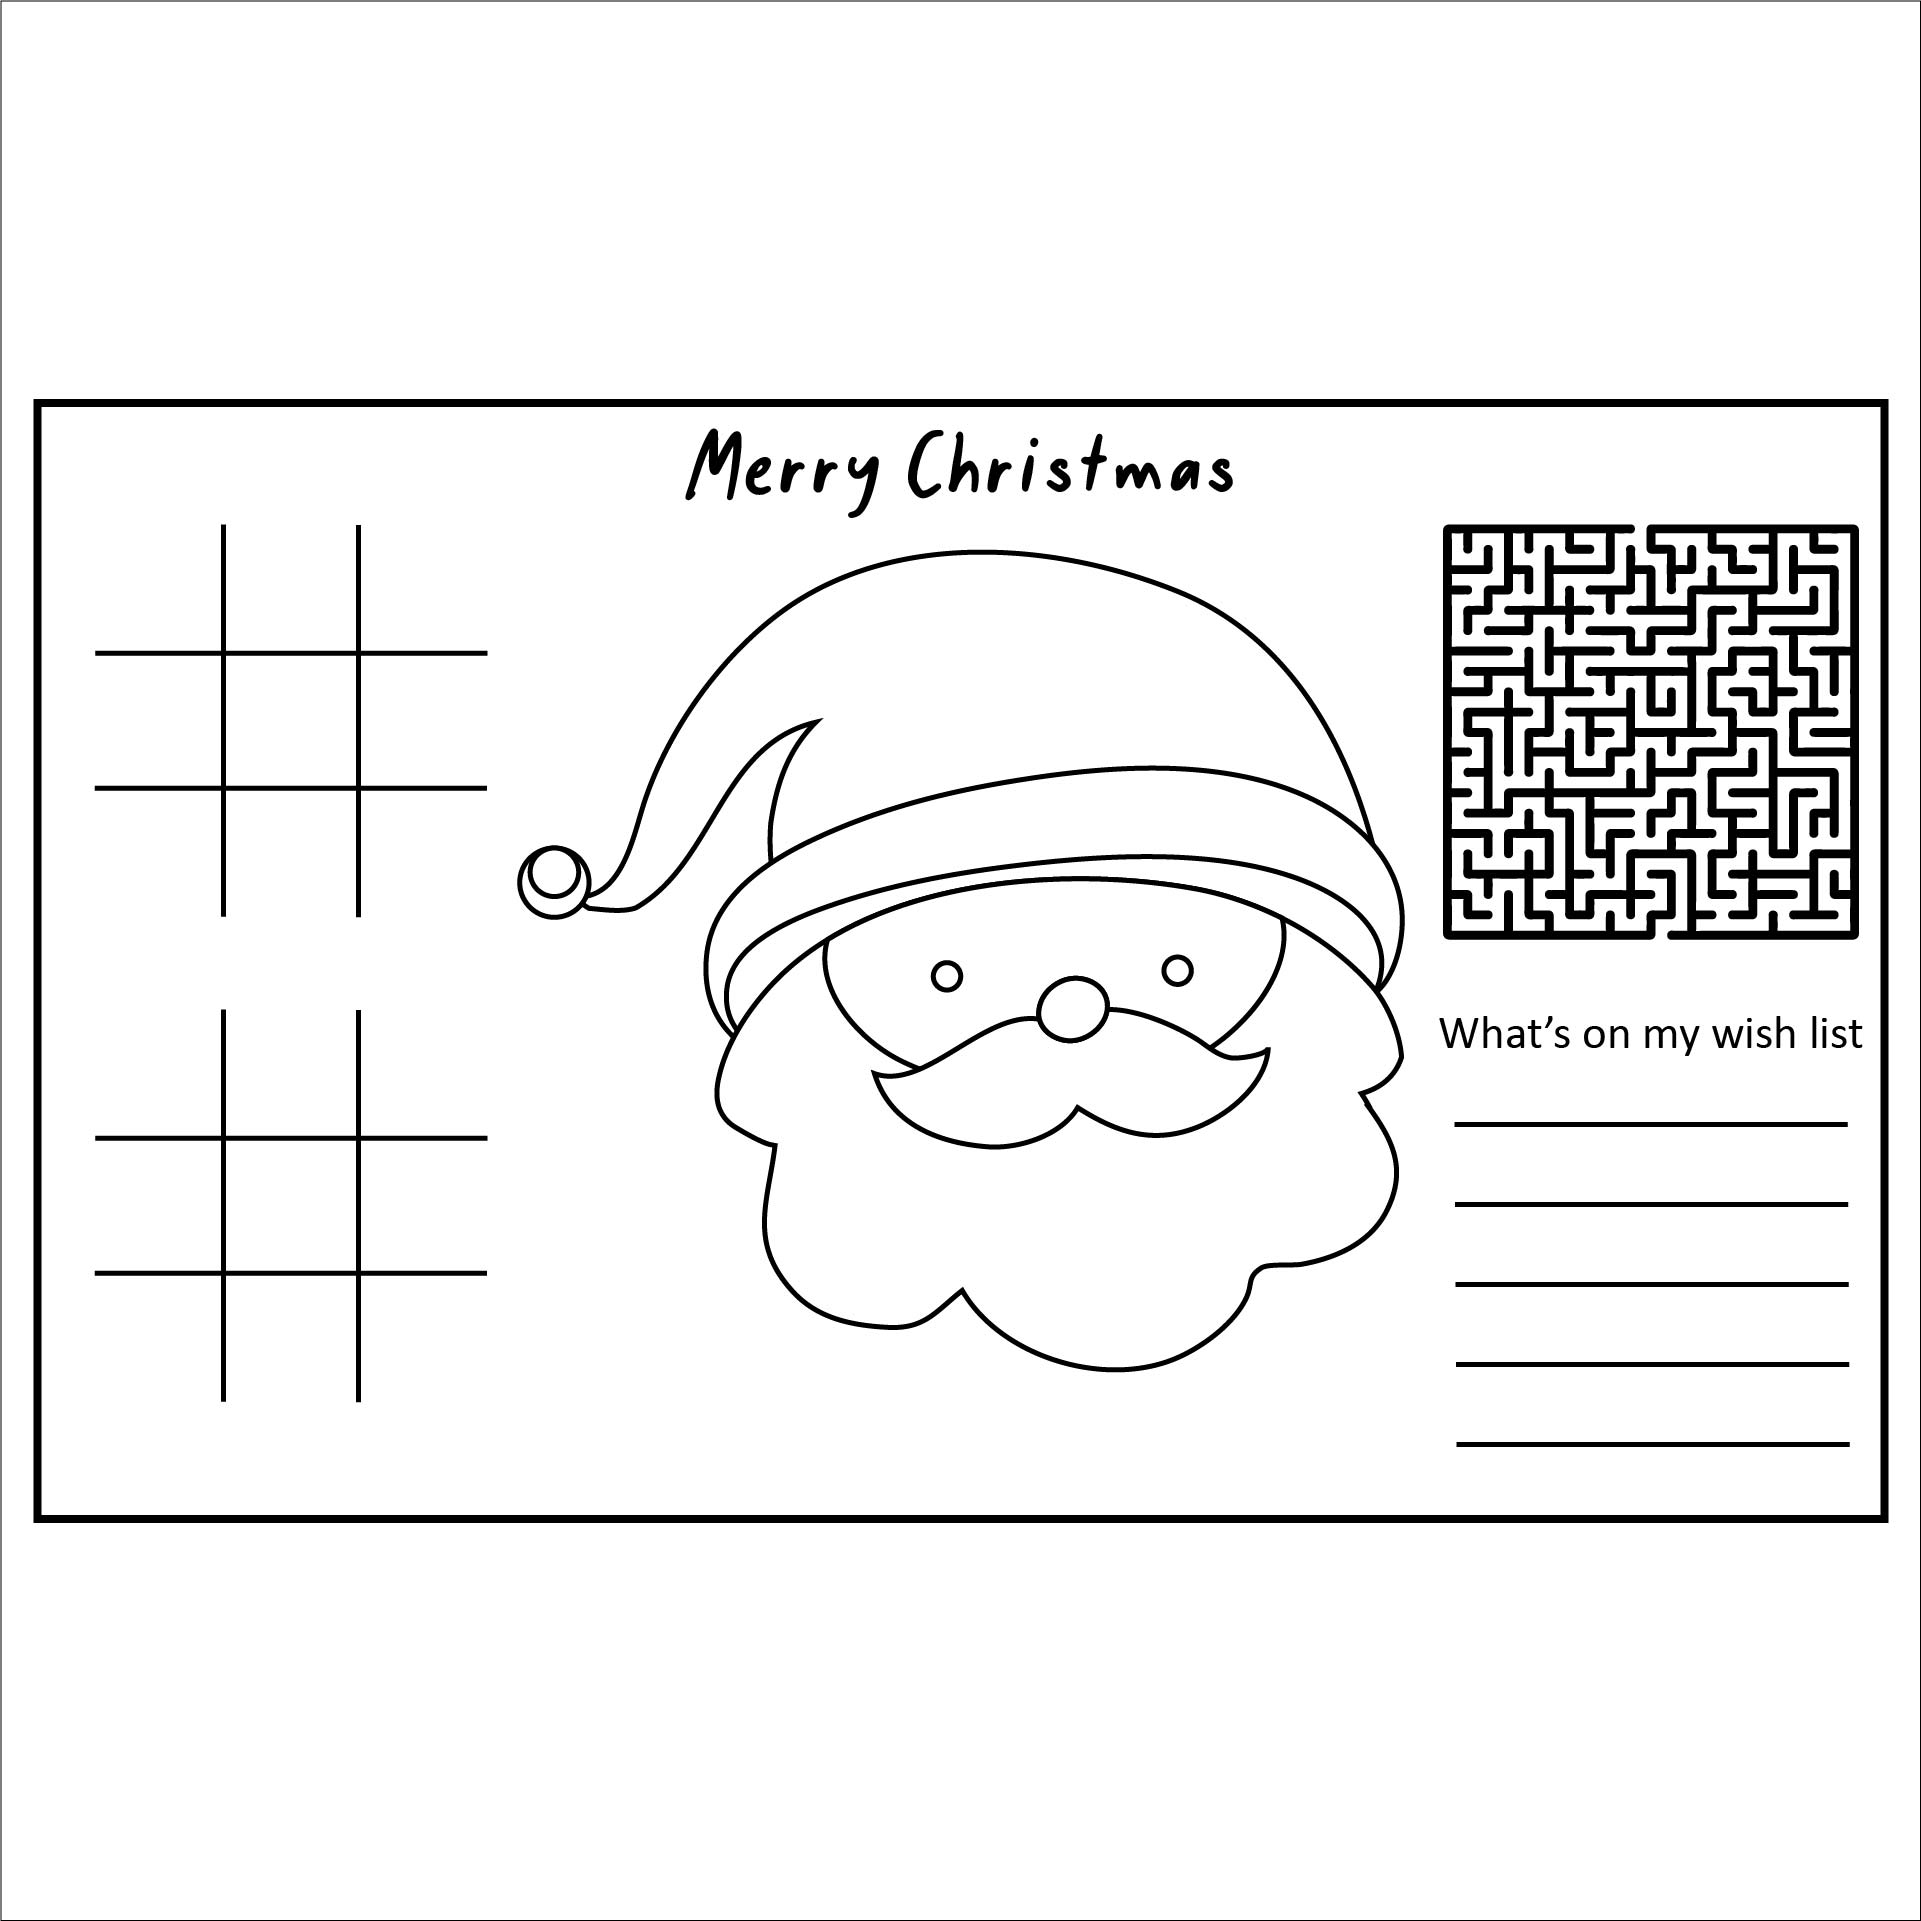 Festive Printable Christmas Placemats For The Holidays